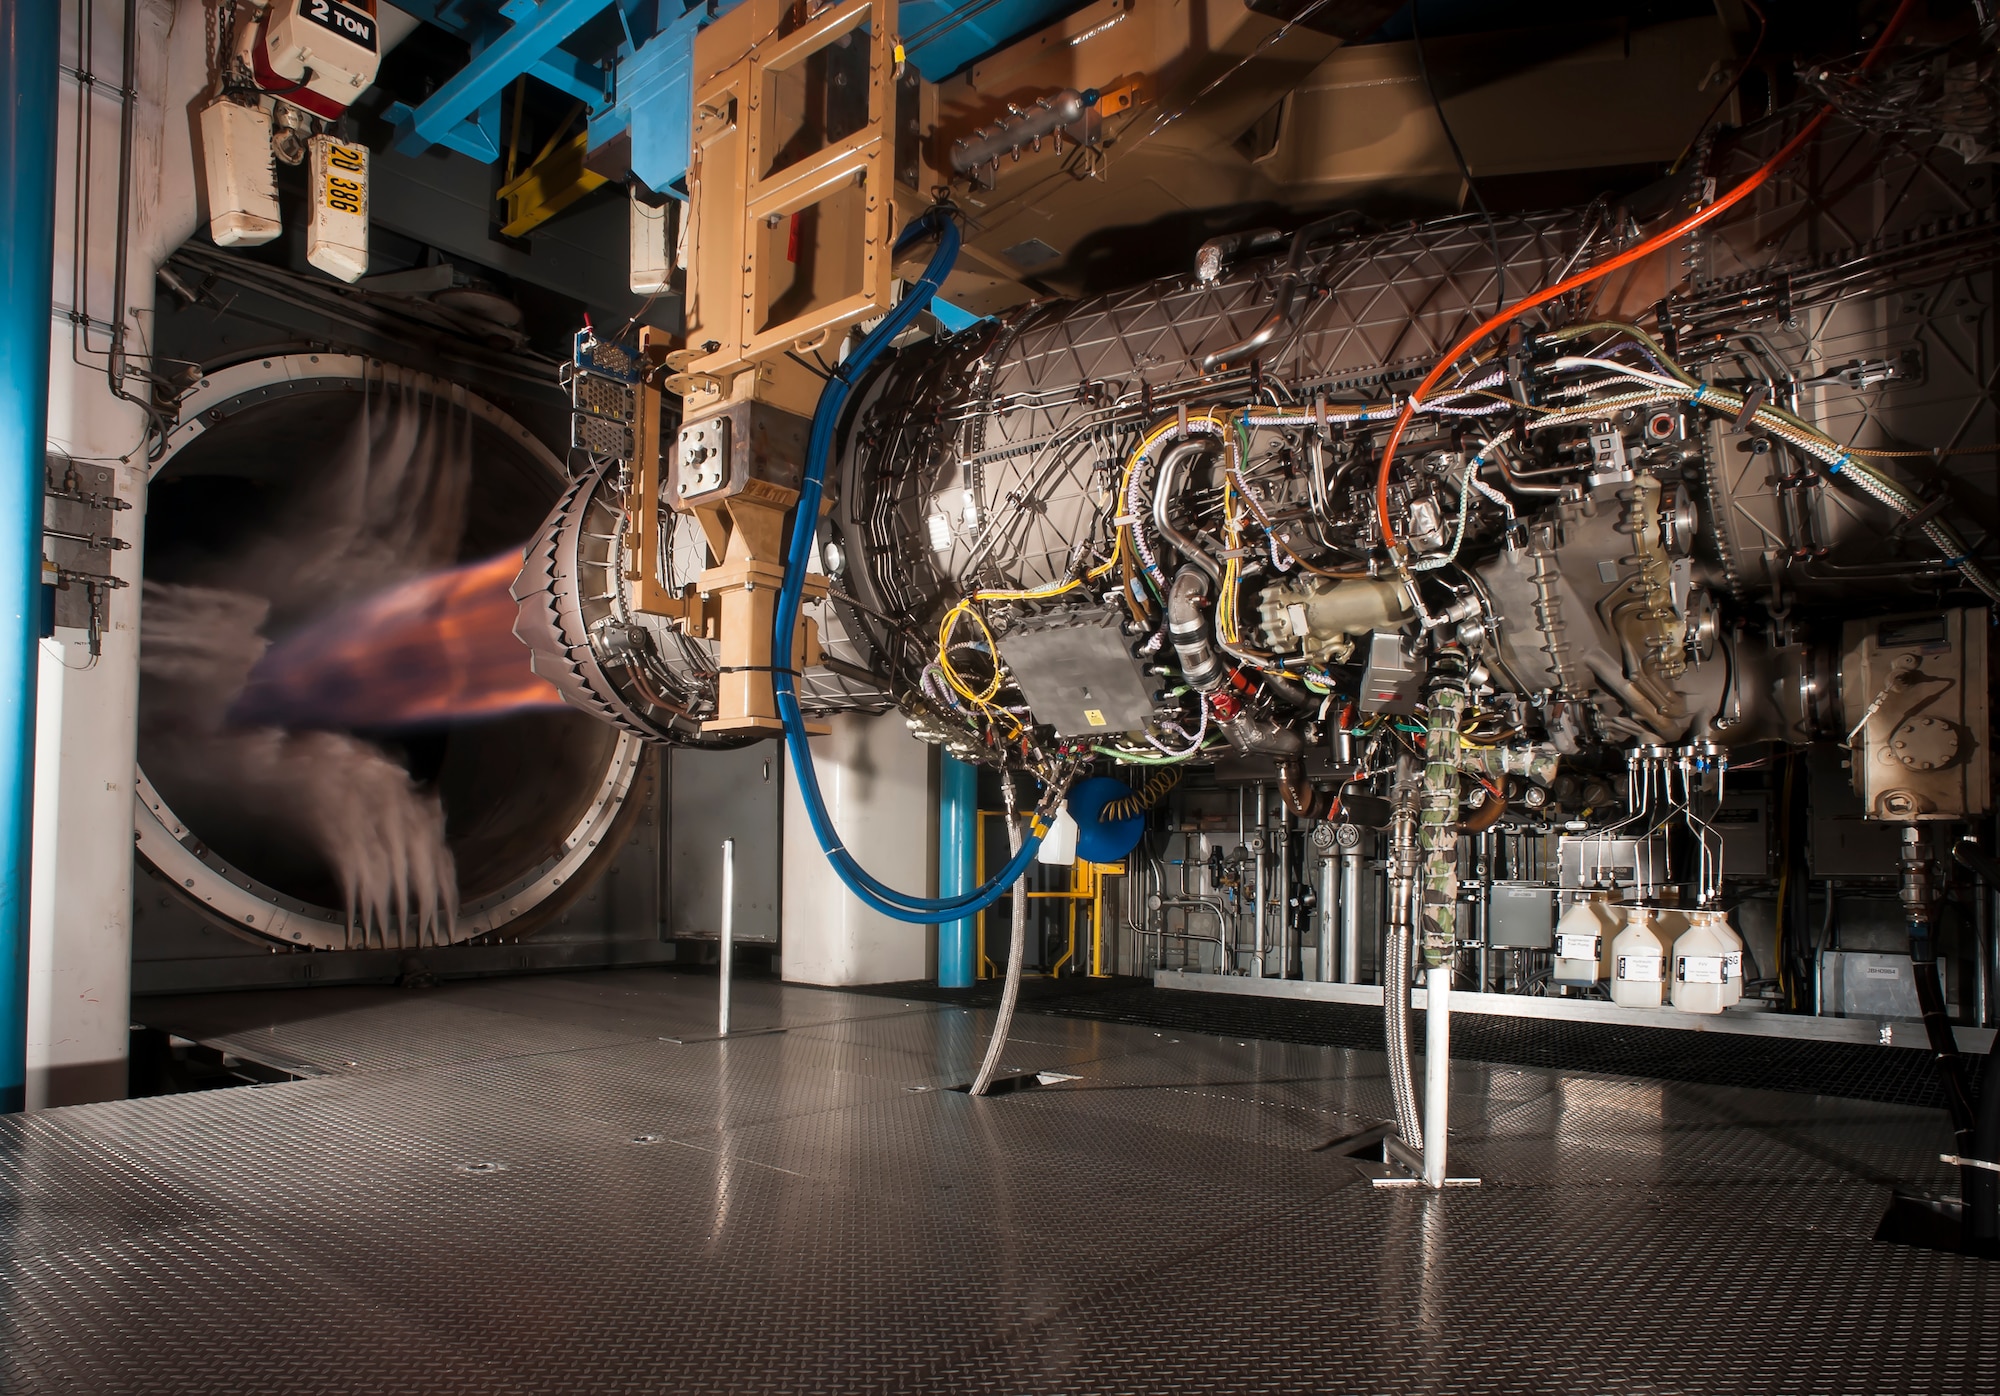 TDAAS enables engineers to quickly gather test data, current and historical, that allows them to evaluate design and engineering processes for next-generation aerospace technologies (like the F135 engine pictured) more efficiently. (U.S. Air Force photo/Rick Goodfriend)